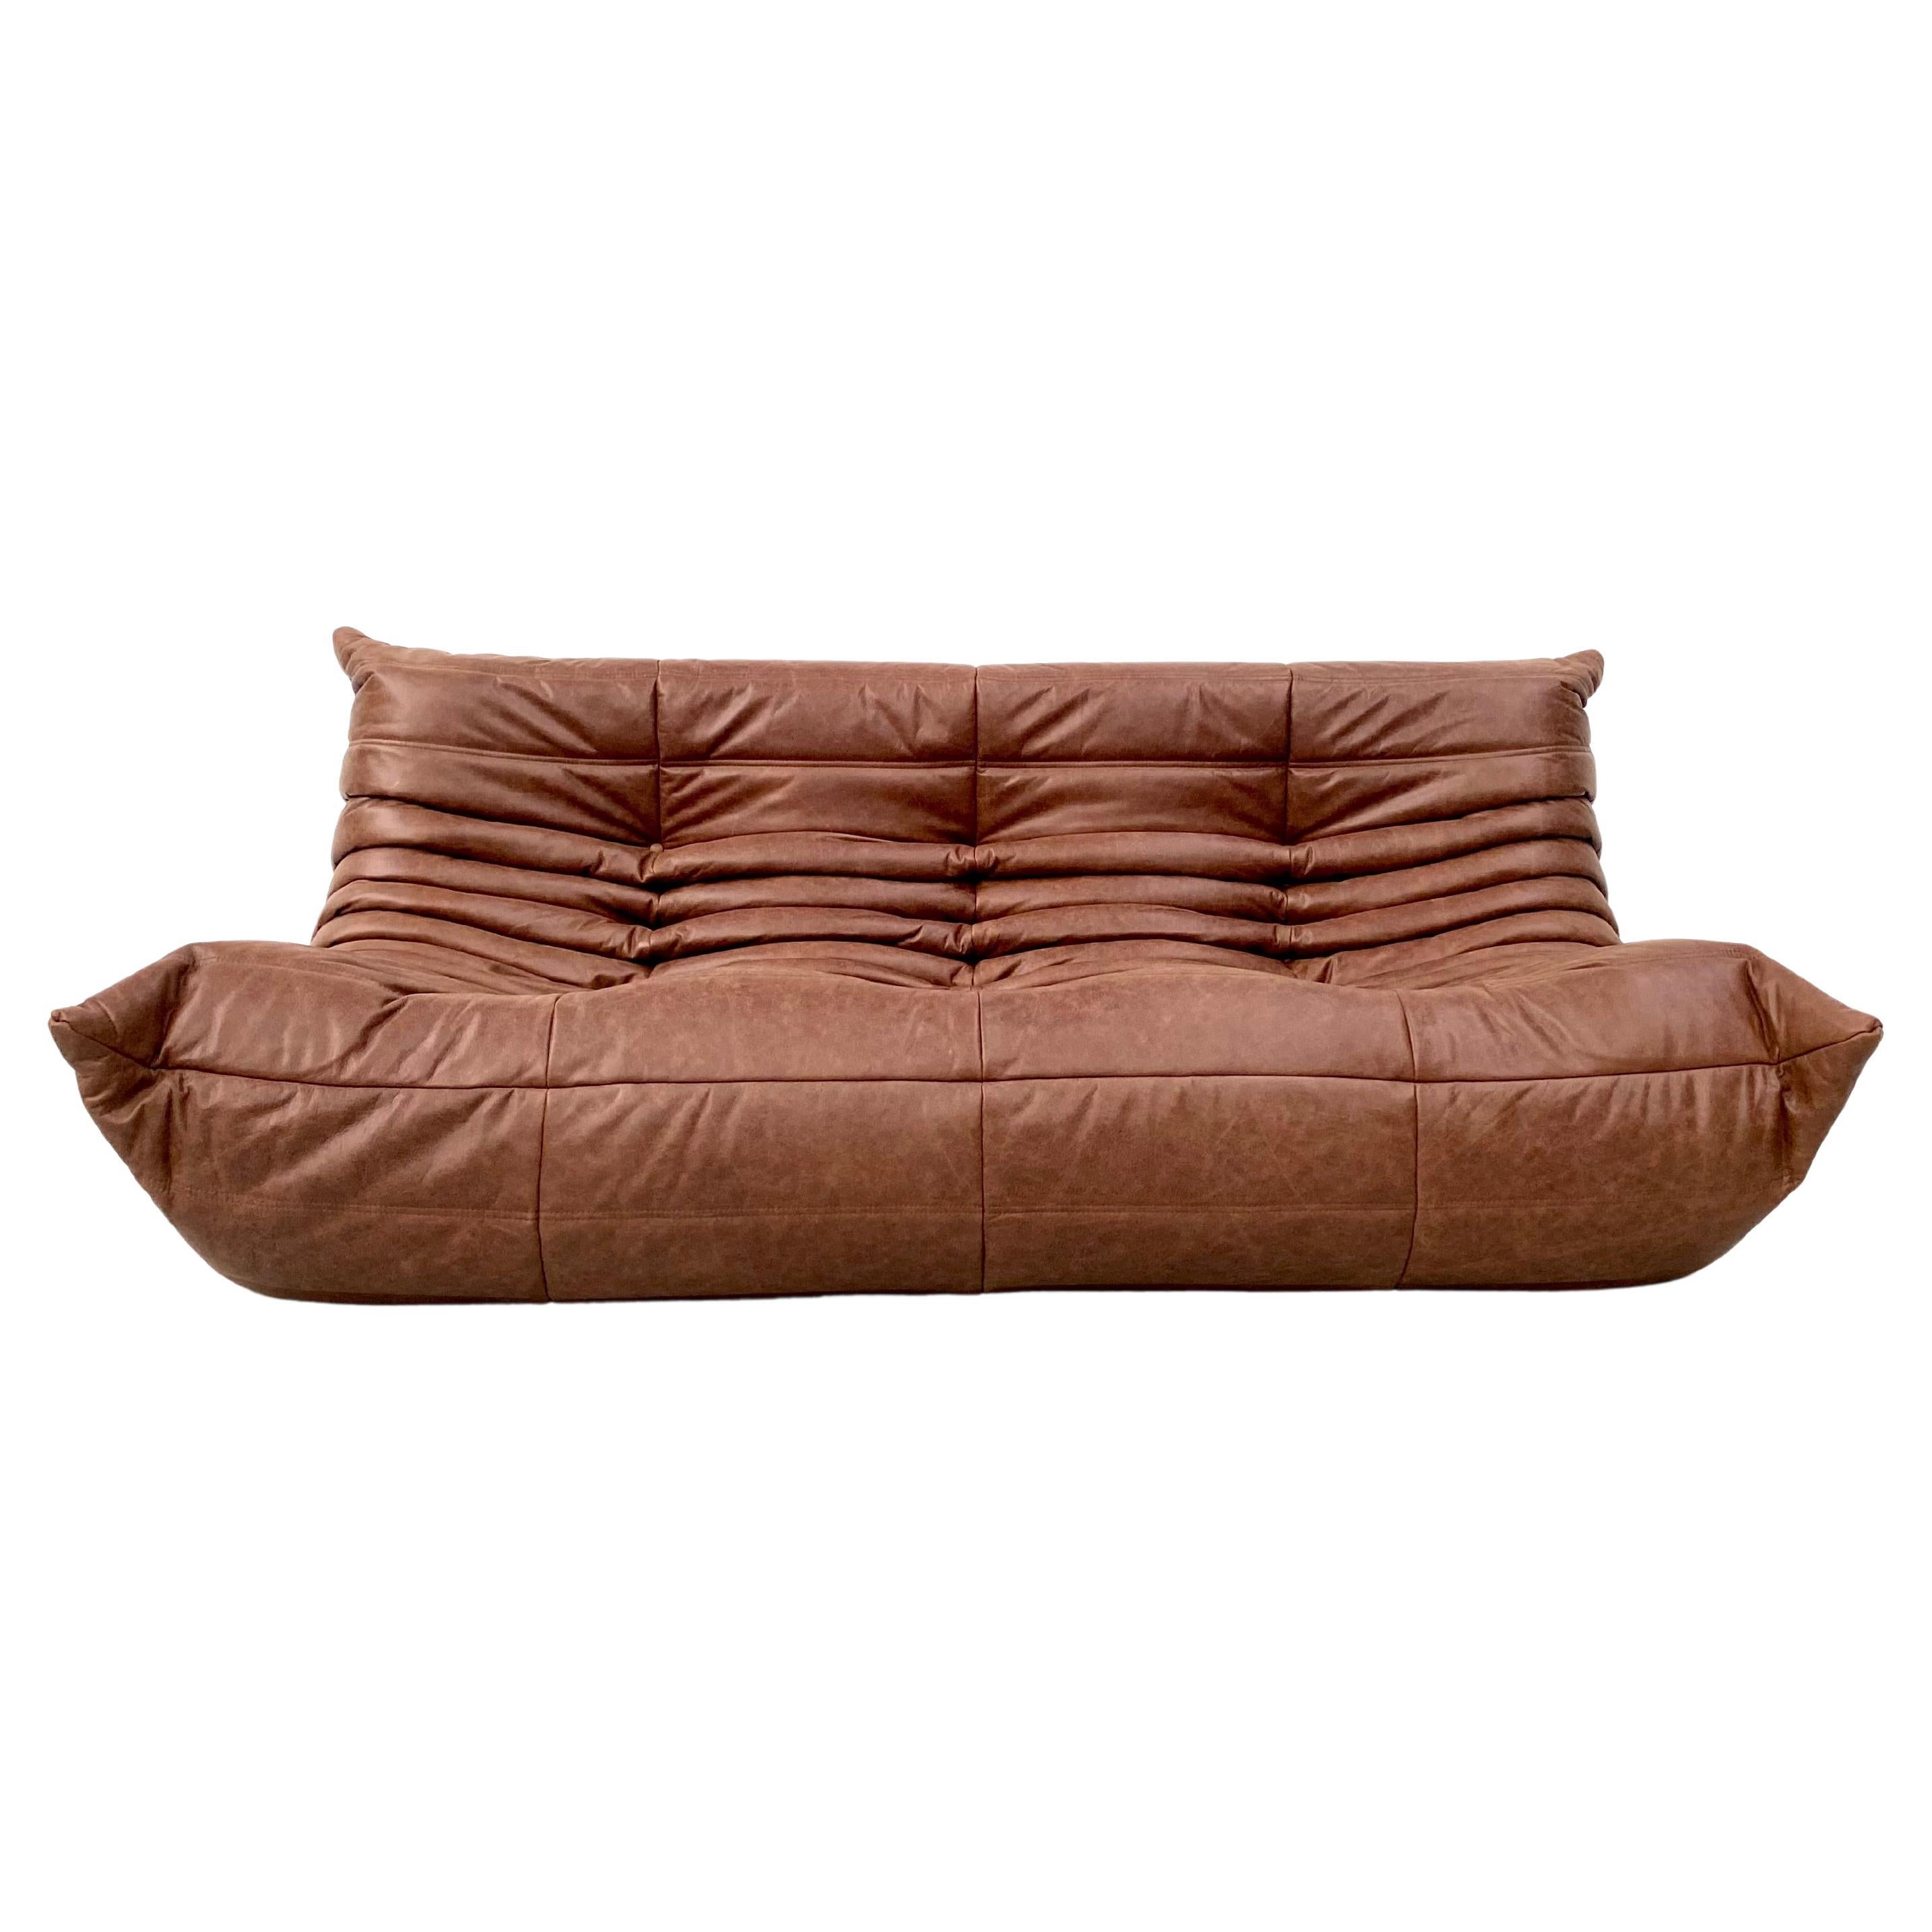 French Vintage Togo Sofa in Brown Leather by Michel Ducaroy for Ligne Roset.